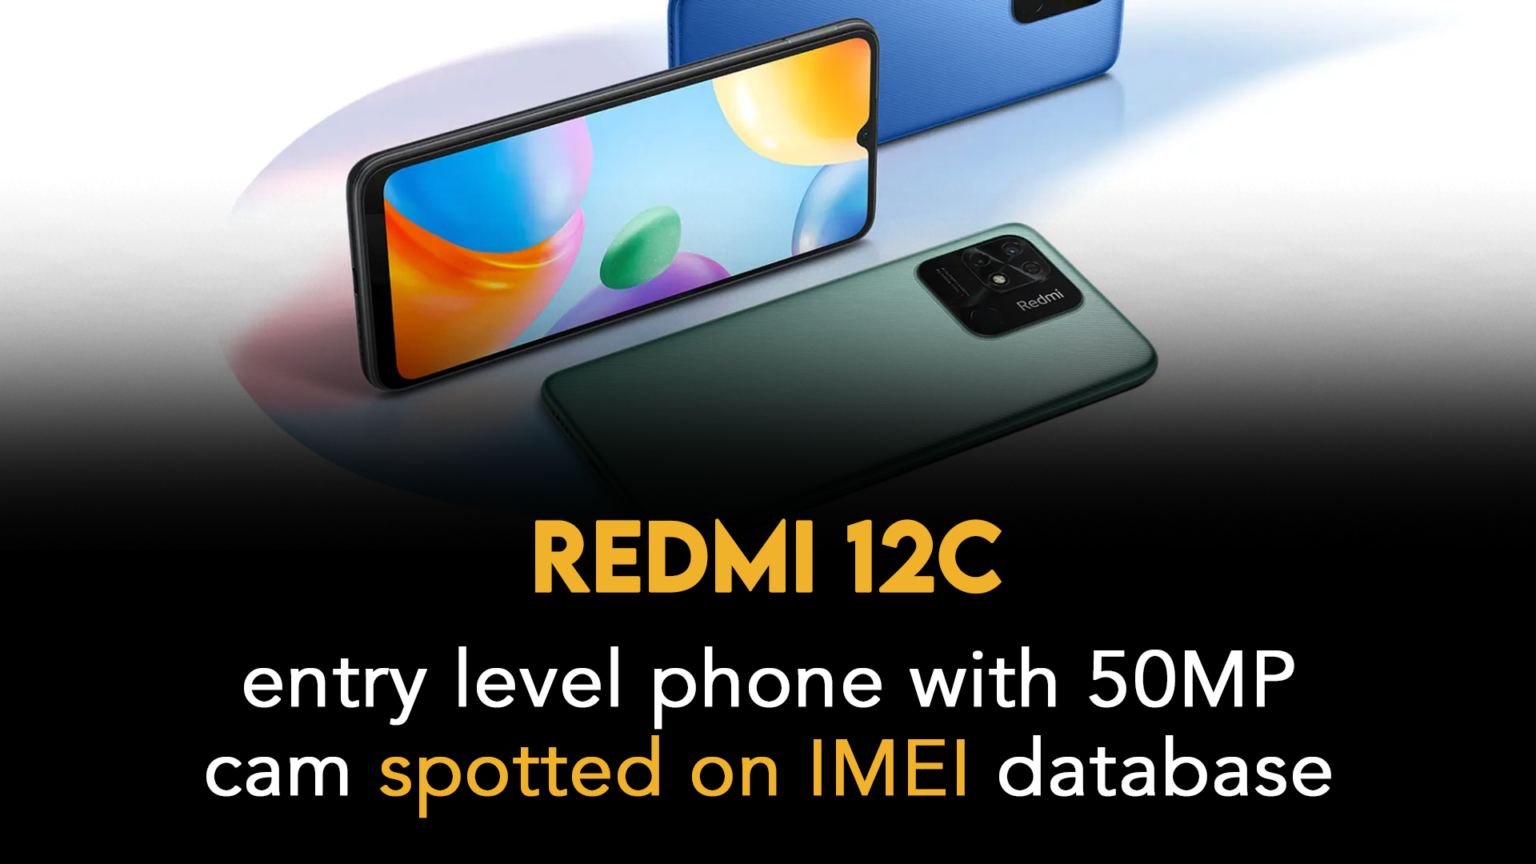 Redmi 12c Seen On Imei Database Signaling Its Upcoming Launch Unbox Diaries 1838